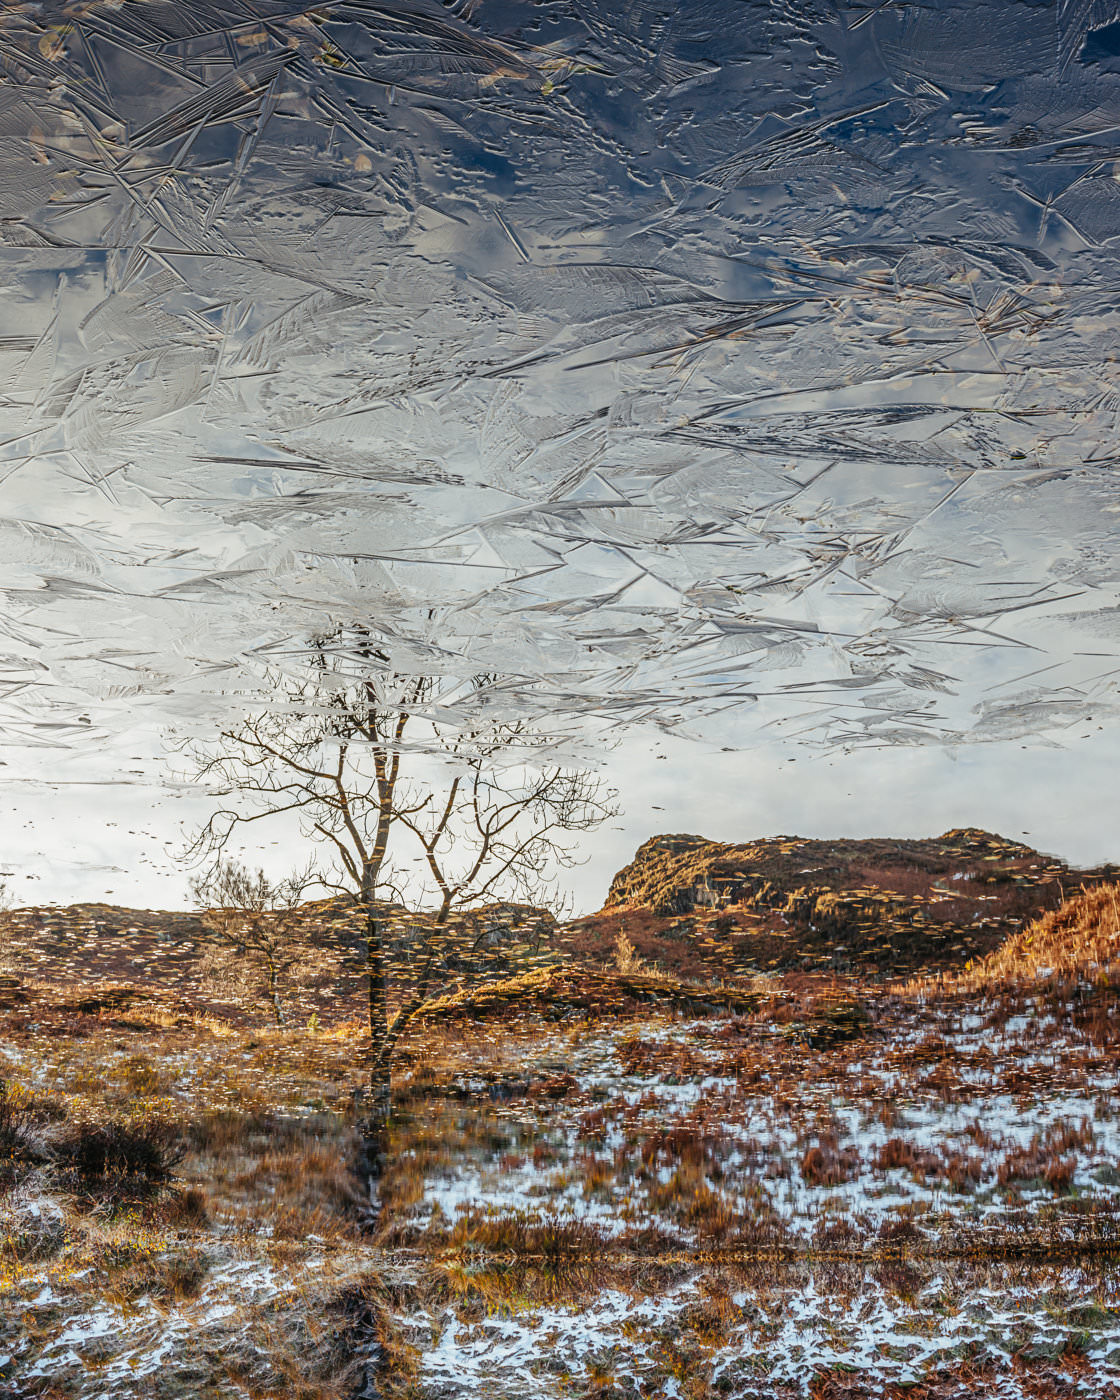 Through the Looking Glass - Holme Fell